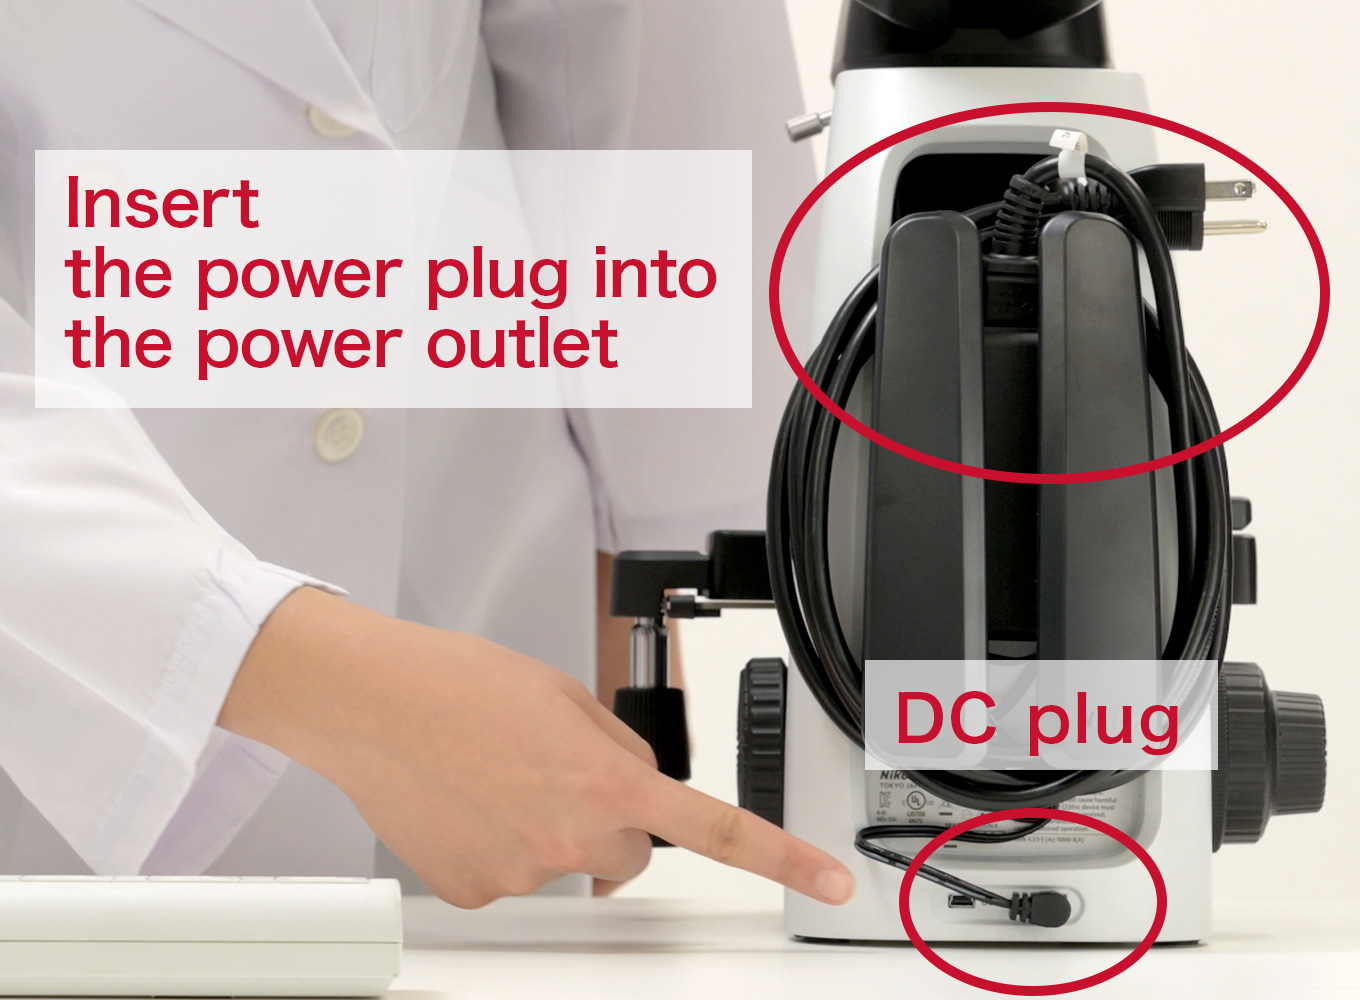 Insert the power plug into the power outlet